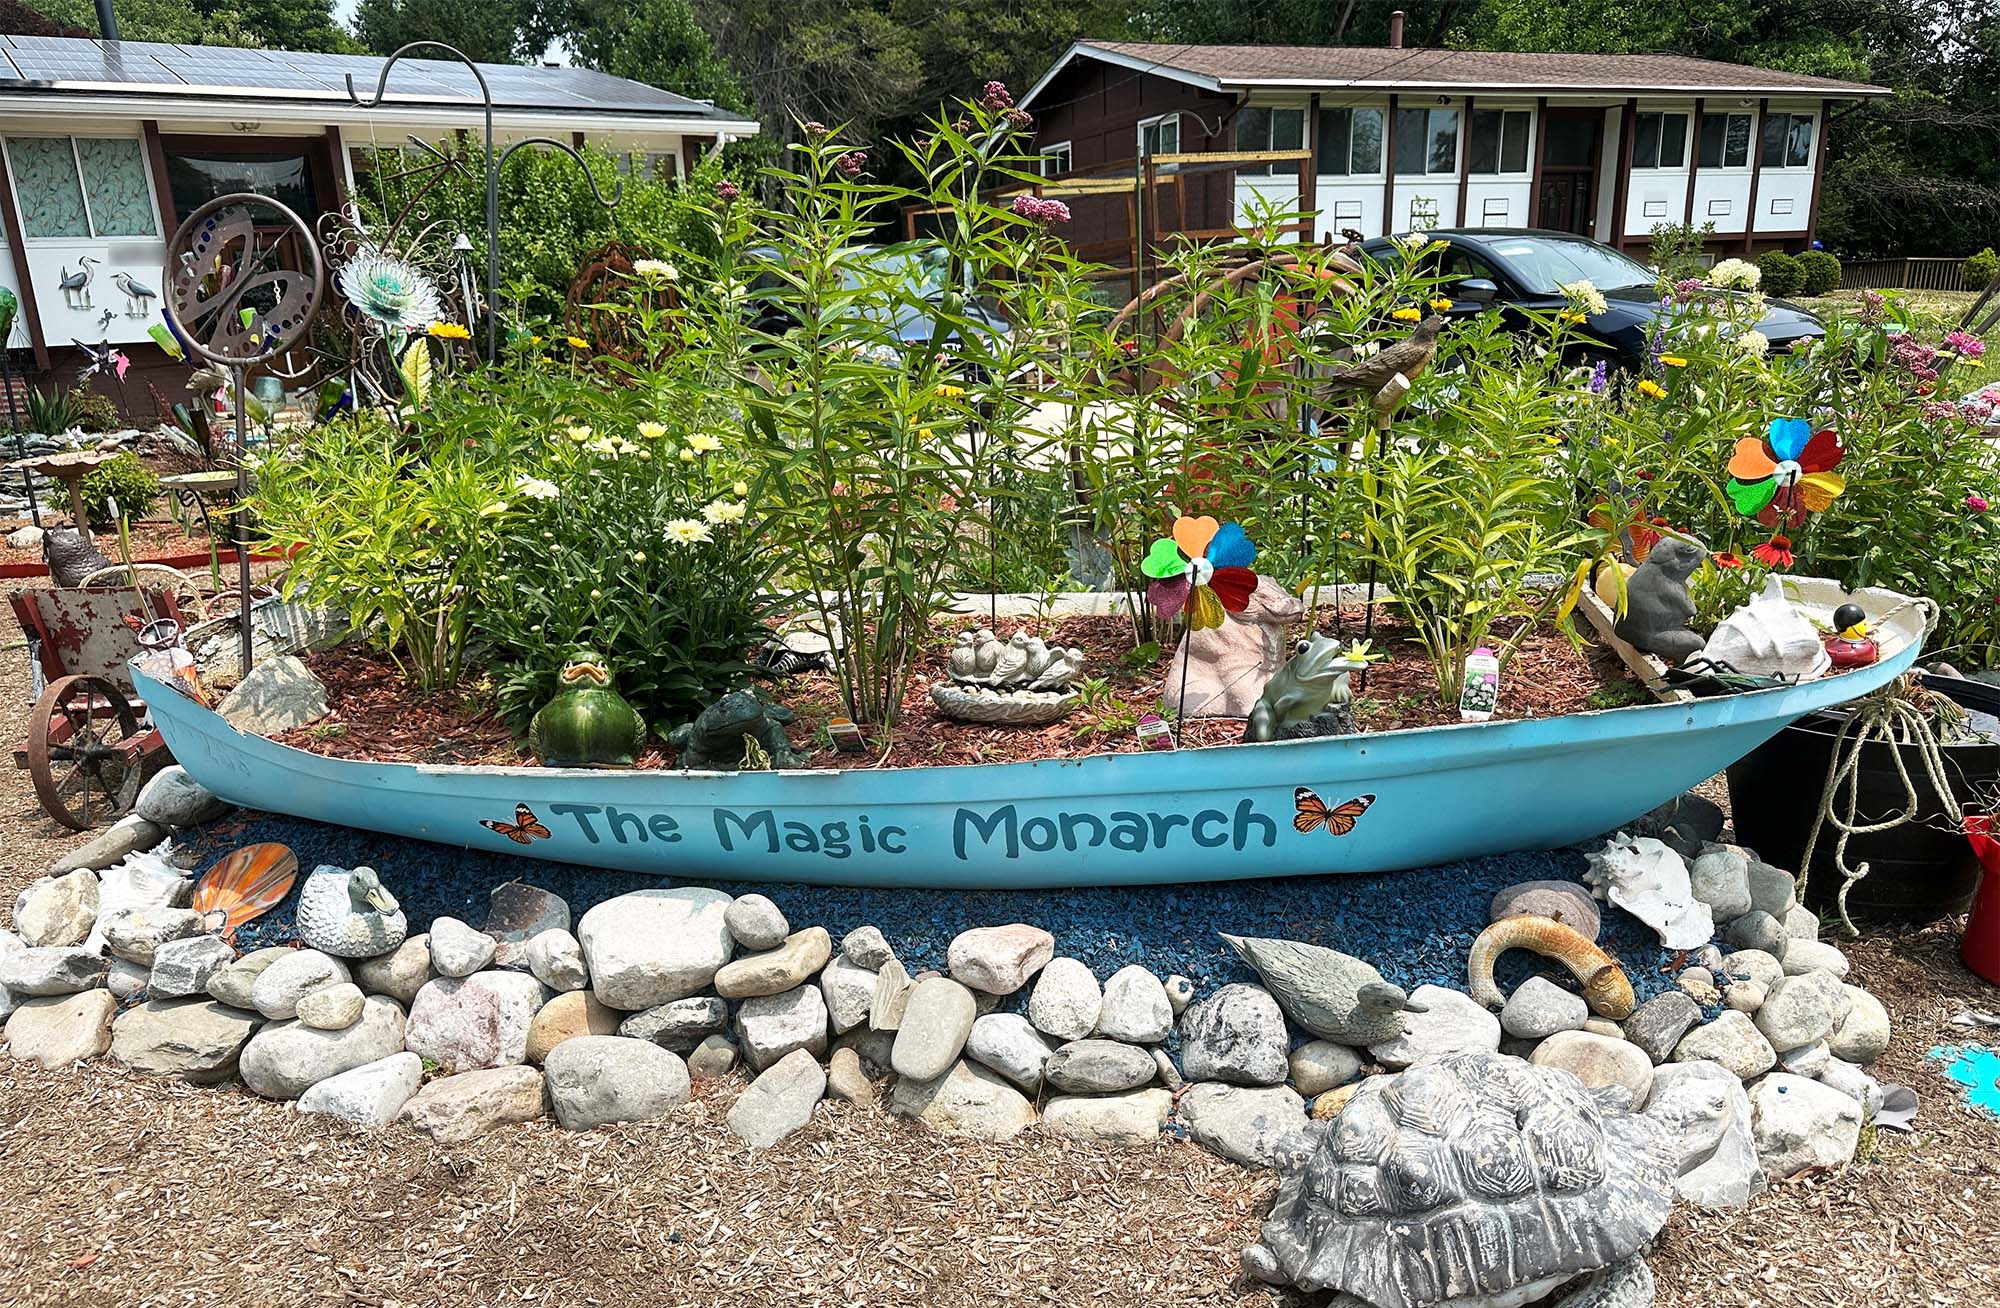 in the front yard of a house, a blue-painted boat with the words "the magic monarch" is being used as a planter